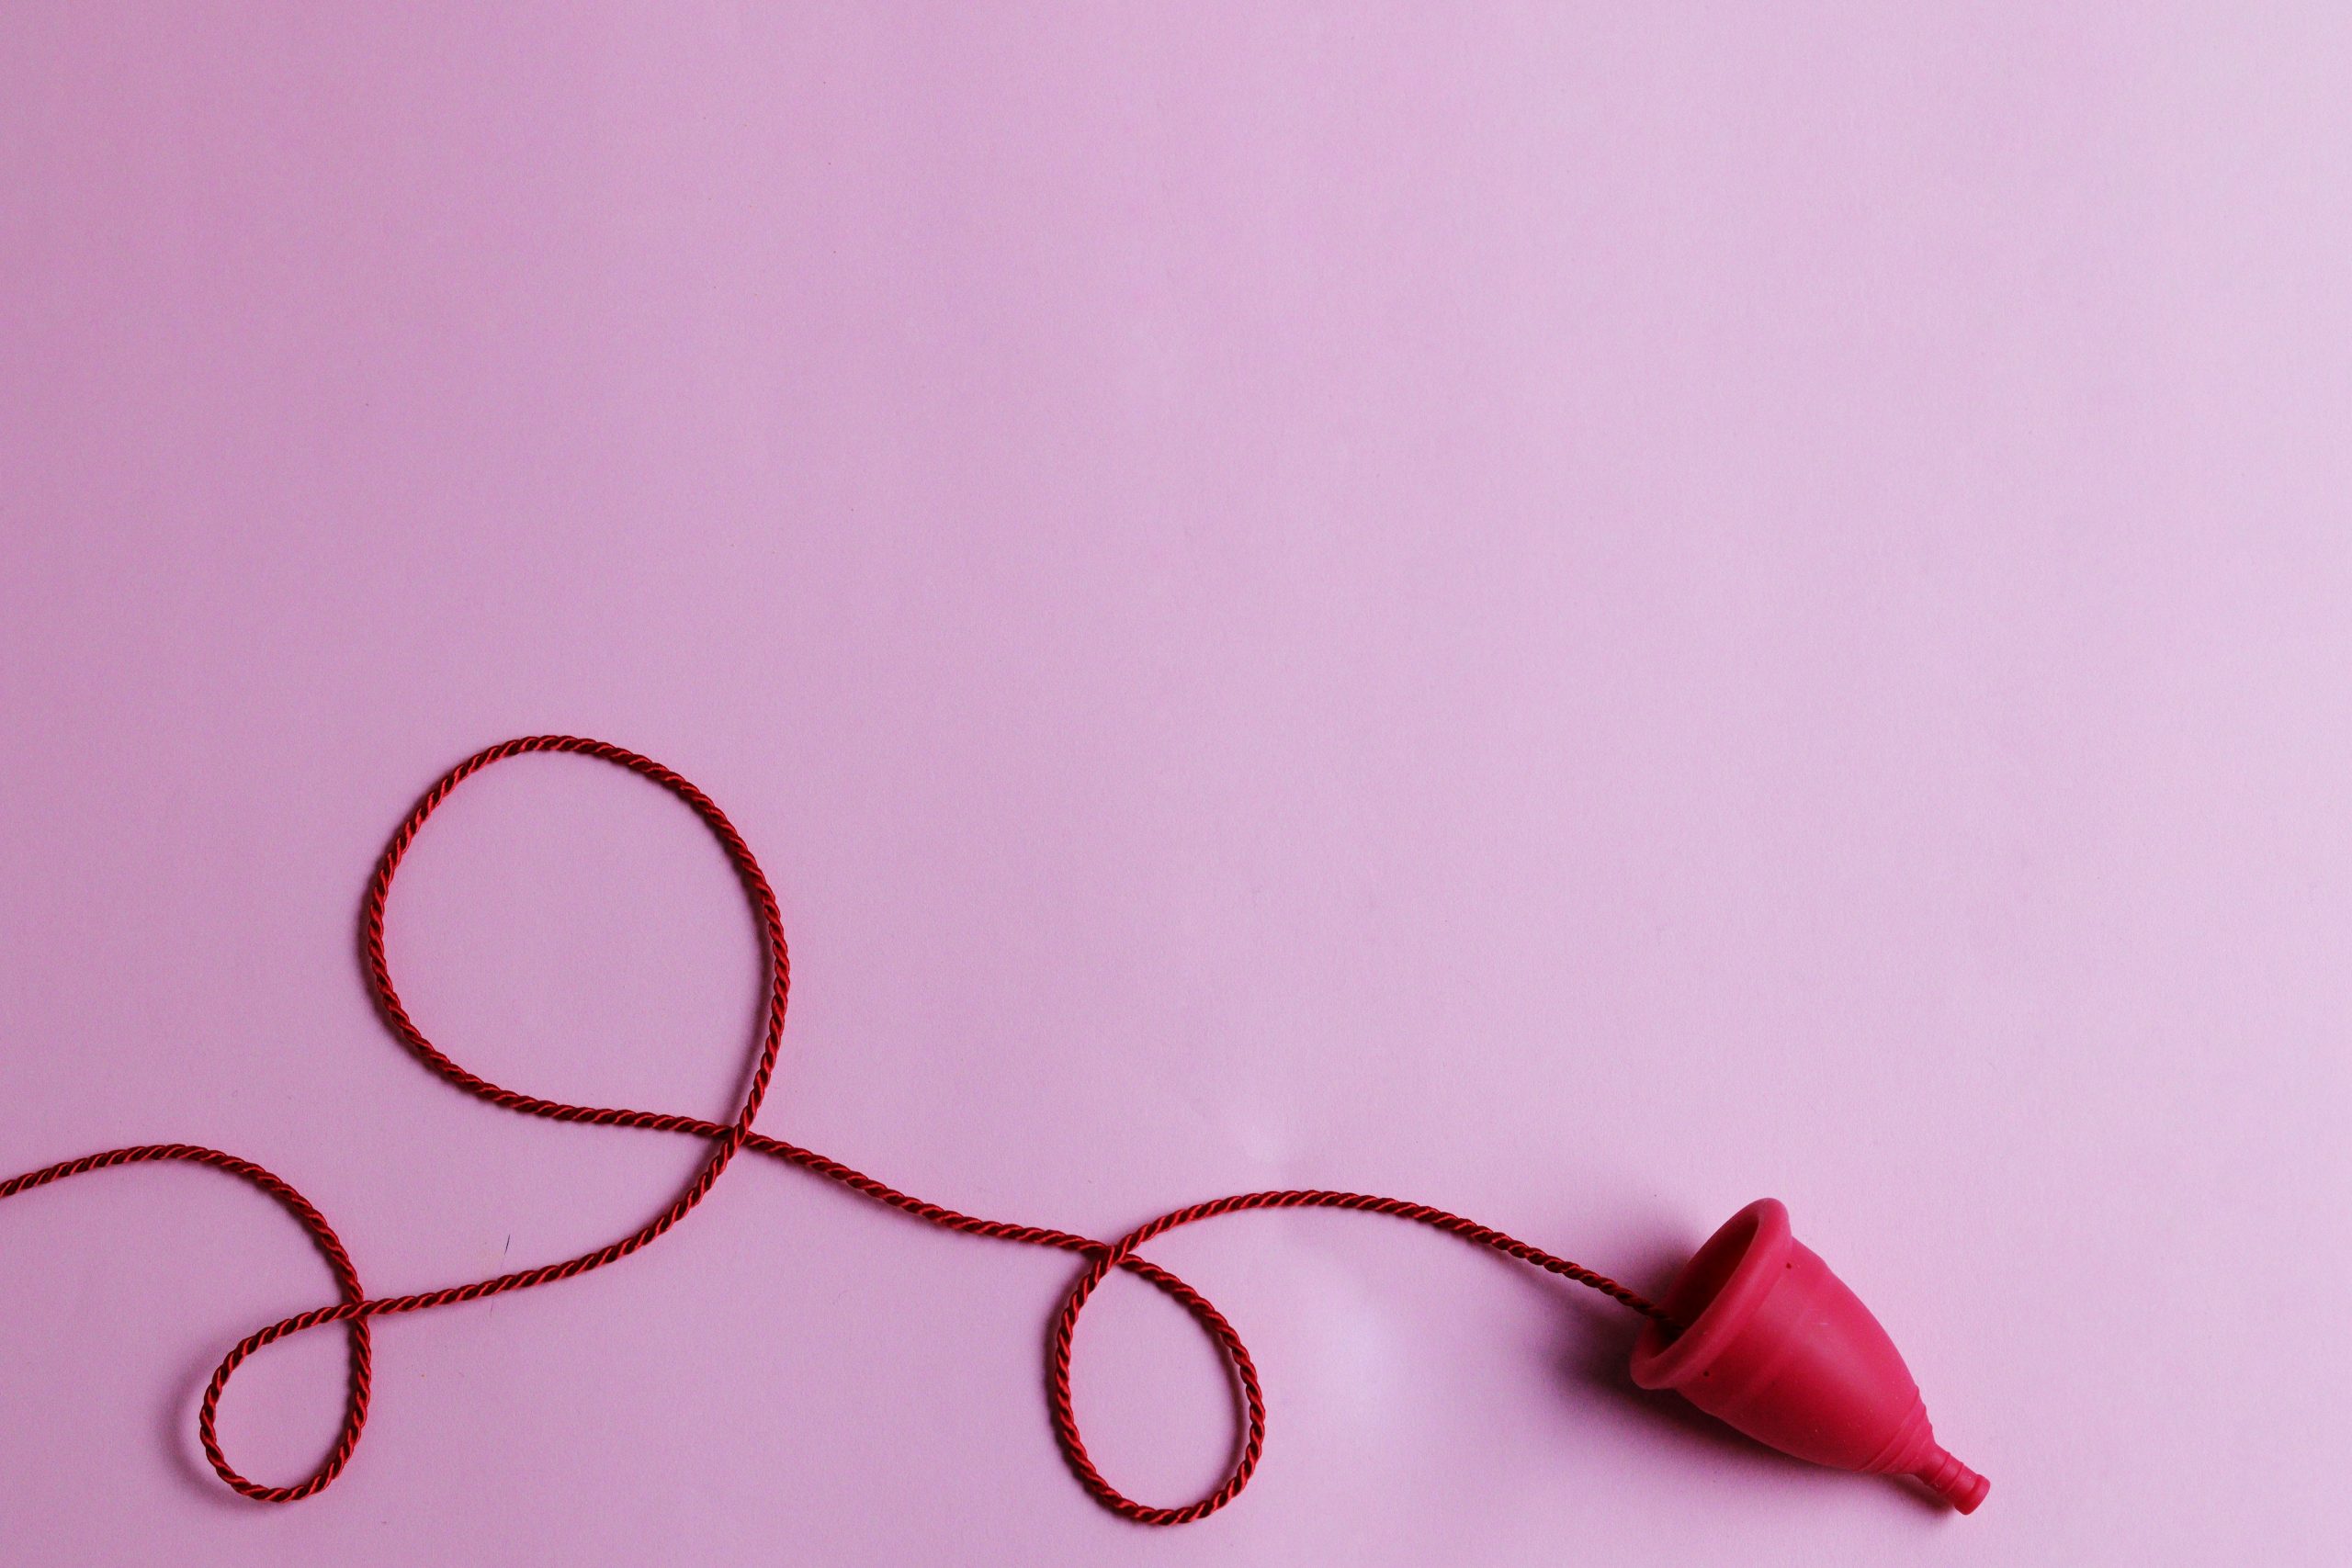 Benefits of Menstrual Cups Over Tampons